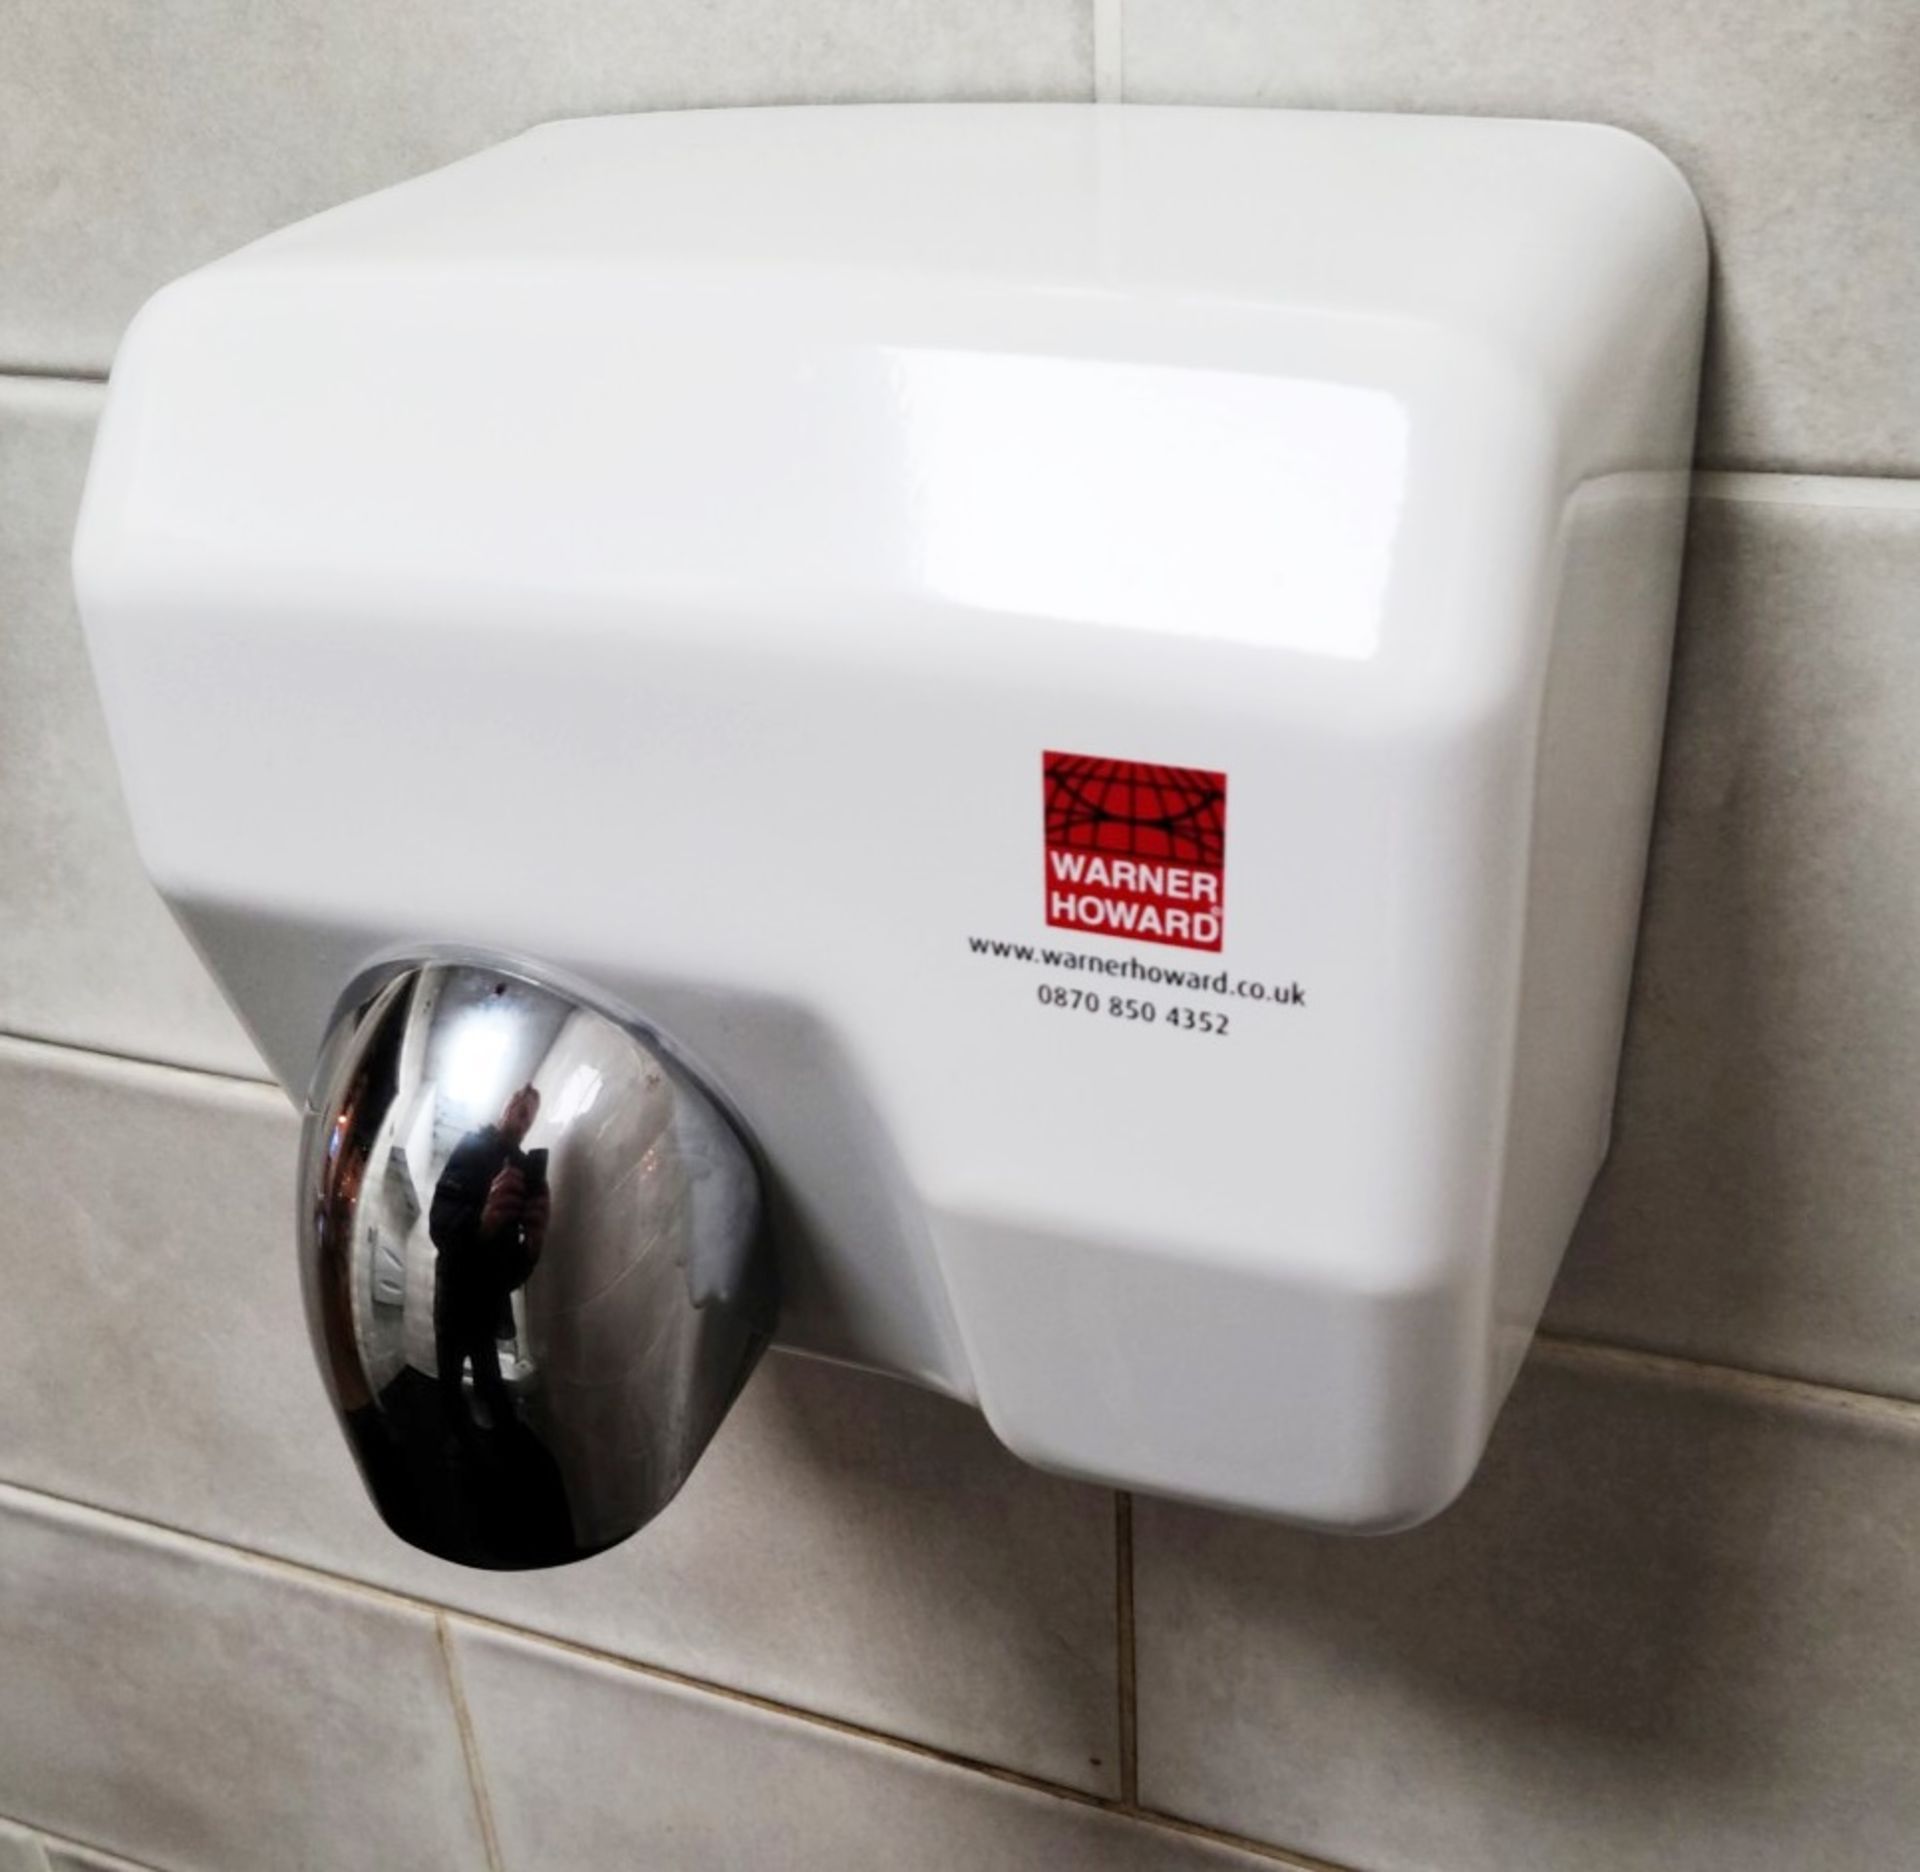 1 x WARNER HOWARD High Performance Hand Dryer 360 Degree Swivel Nozzle For Public Areas